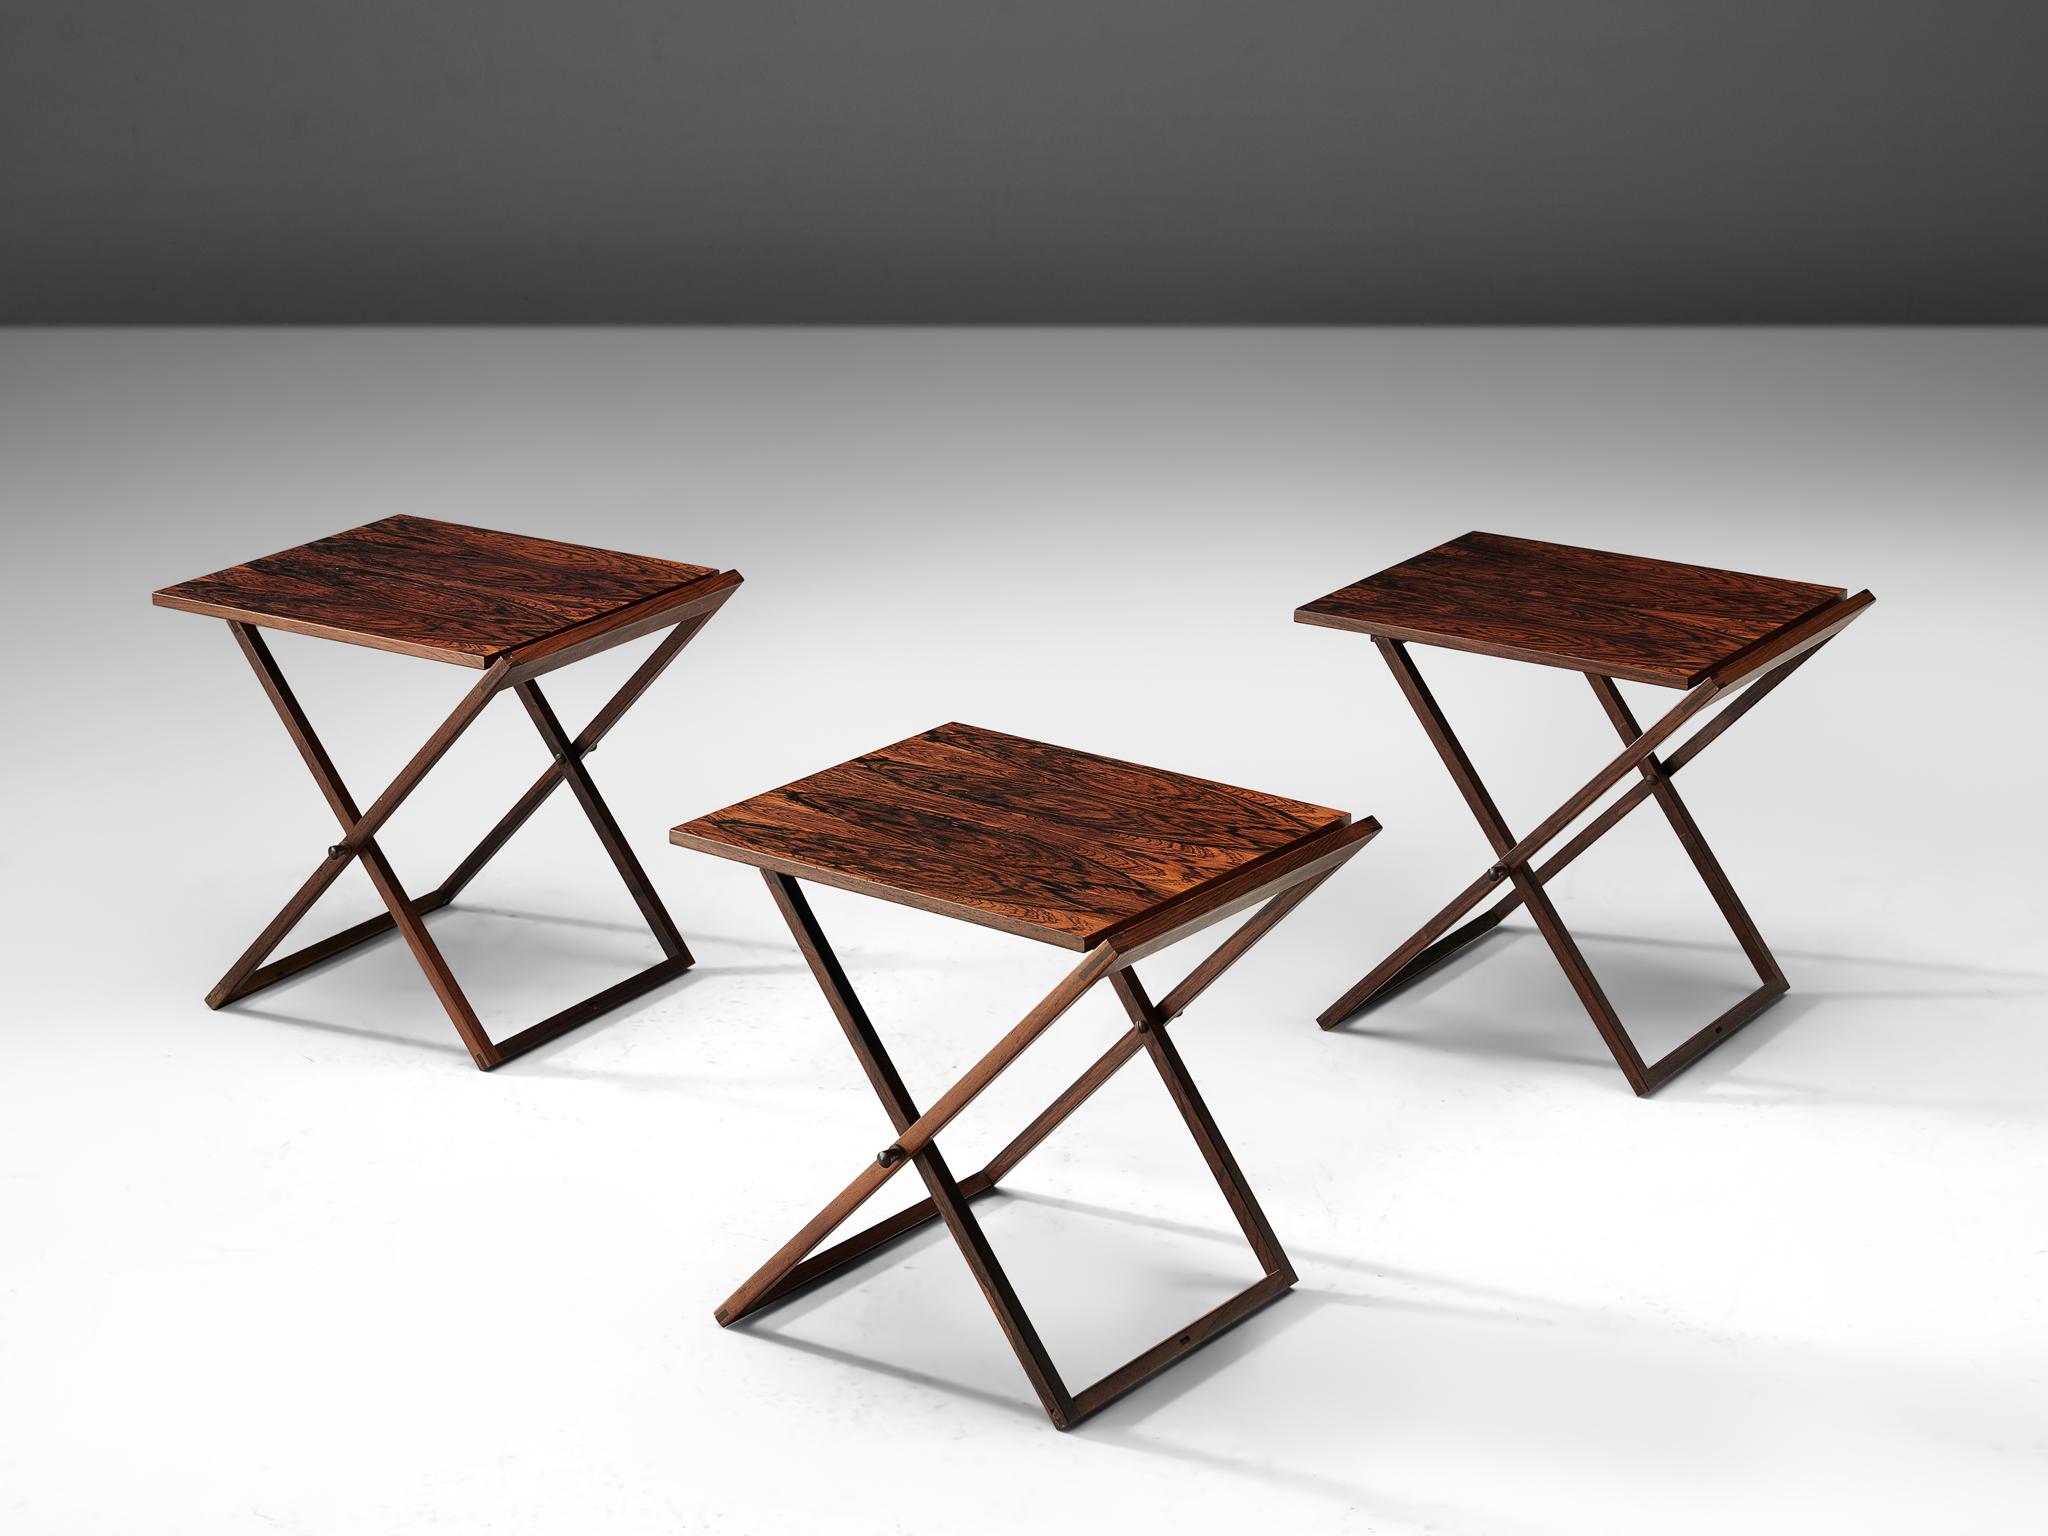 Illum Wikkelsø for Silkenborg, set of three side tables, rosewood and copper, Denmark, 1950s.

This set, that is designed by Illum Wikkelsø was made by cabinet maker Silkenborg. The tables are executed in rosewood with detailing such as the hinges